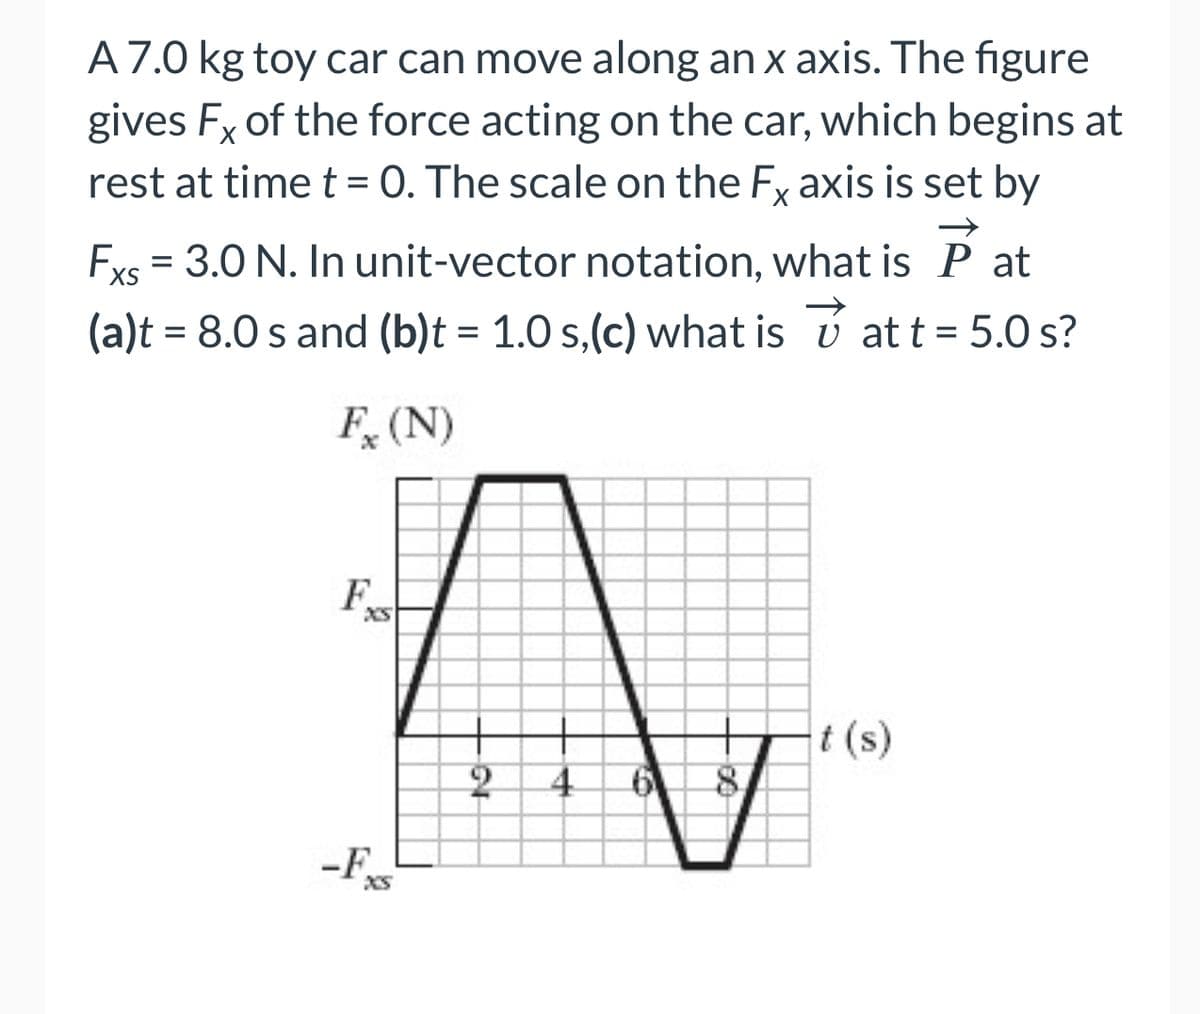 A 7.0 kg toy car can move along an x axis. The figure
gives Fx of the force acting on the car, which begins at
rest at time t = 0. The scale on the Fx axis is set by
Fxs = 3.0 N. In unit-vector notation, what is P at
XS
(a)t = 8.0 s and (b)t = 1.0 s,(c) what is ú at t = 5.0 s?
Fx (N)
F
XS
-F
2
10
4
6 8
t (s)